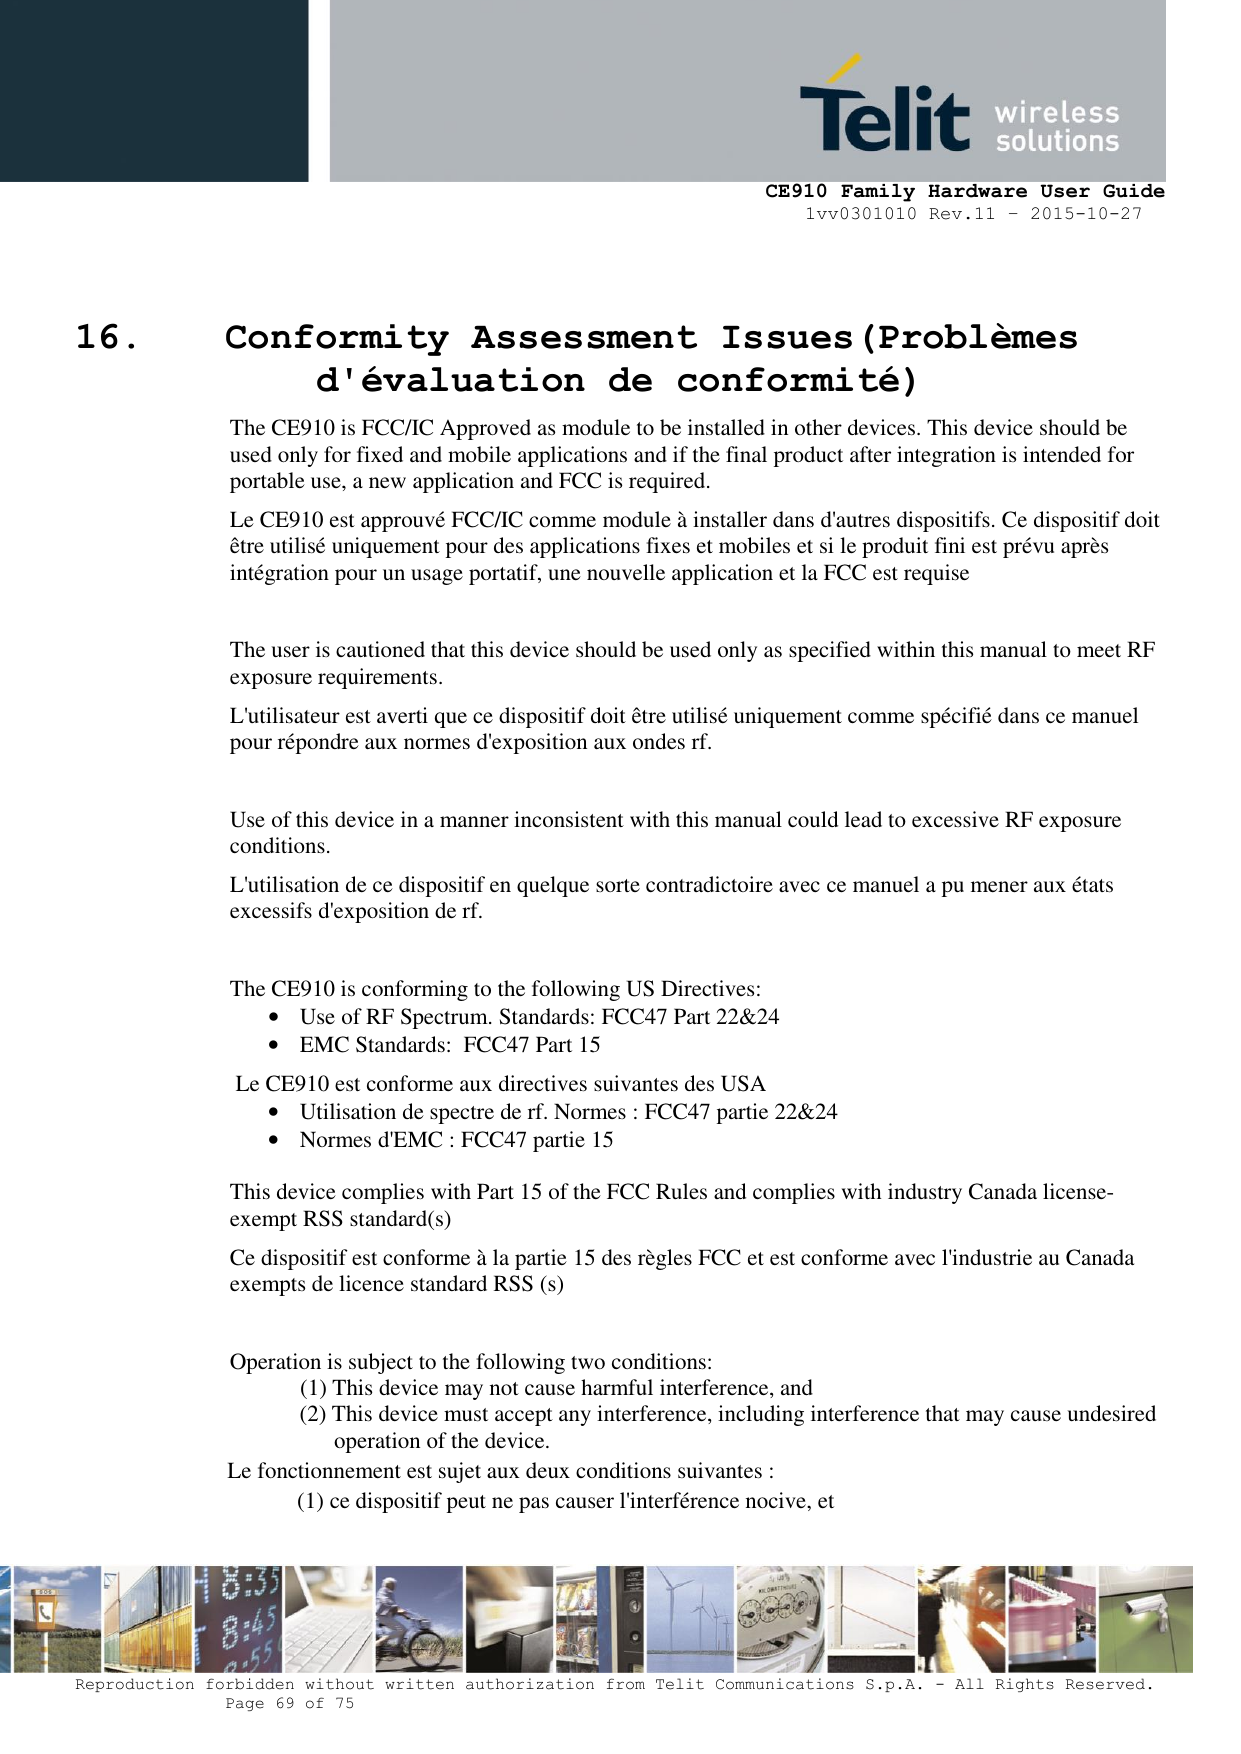     CE910 Family Hardware User Guide 1vv0301010 Rev.11 – 2015-10-27 Reproduction forbidden without written authorization from Telit Communications S.p.A. - All Rights Reserved.    Page 69 of 75                                                     16. Conformity Assessment Issues(Problèmes d&apos;évaluation de conformité) The CE910 is FCC/IC Approved as module to be installed in other devices. This device should be used only for fixed and mobile applications and if the final product after integration is intended for portable use, a new application and FCC is required. Le CE910 est approuvé FCC/IC comme module à installer dans d&apos;autres dispositifs. Ce dispositif doit être utilisé uniquement pour des applications fixes et mobiles et si le produit fini est prévu après intégration pour un usage portatif, une nouvelle application et la FCC est requise  The user is cautioned that this device should be used only as specified within this manual to meet RF exposure requirements.  L&apos;utilisateur est averti que ce dispositif doit être utilisé uniquement comme spécifié dans ce manuel pour répondre aux normes d&apos;exposition aux ondes rf.  Use of this device in a manner inconsistent with this manual could lead to excessive RF exposure conditions. L&apos;utilisation de ce dispositif en quelque sorte contradictoire avec ce manuel a pu mener aux états excessifs d&apos;exposition de rf.  The CE910 is conforming to the following US Directives: • Use of RF Spectrum. Standards: FCC47 Part 22&amp;24 • EMC Standards:  FCC47 Part 15 Le CE910 est conforme aux directives suivantes des USA • Utilisation de spectre de rf. Normes : FCC47 partie 22&amp;24 • Normes d&apos;EMC : FCC47 partie 15  This device complies with Part 15 of the FCC Rules and complies with industry Canada license-exempt RSS standard(s) Ce dispositif est conforme à la partie 15 des règles FCC et est conforme avec l&apos;industrie au Canada exempts de licence standard RSS (s)  Operation is subject to the following two conditions: (1) This device may not cause harmful interference, and (2) This device must accept any interference, including interference that may cause undesired operation of the device. Le fonctionnement est sujet aux deux conditions suivantes : (1) ce dispositif peut ne pas causer l&apos;interférence nocive, et 